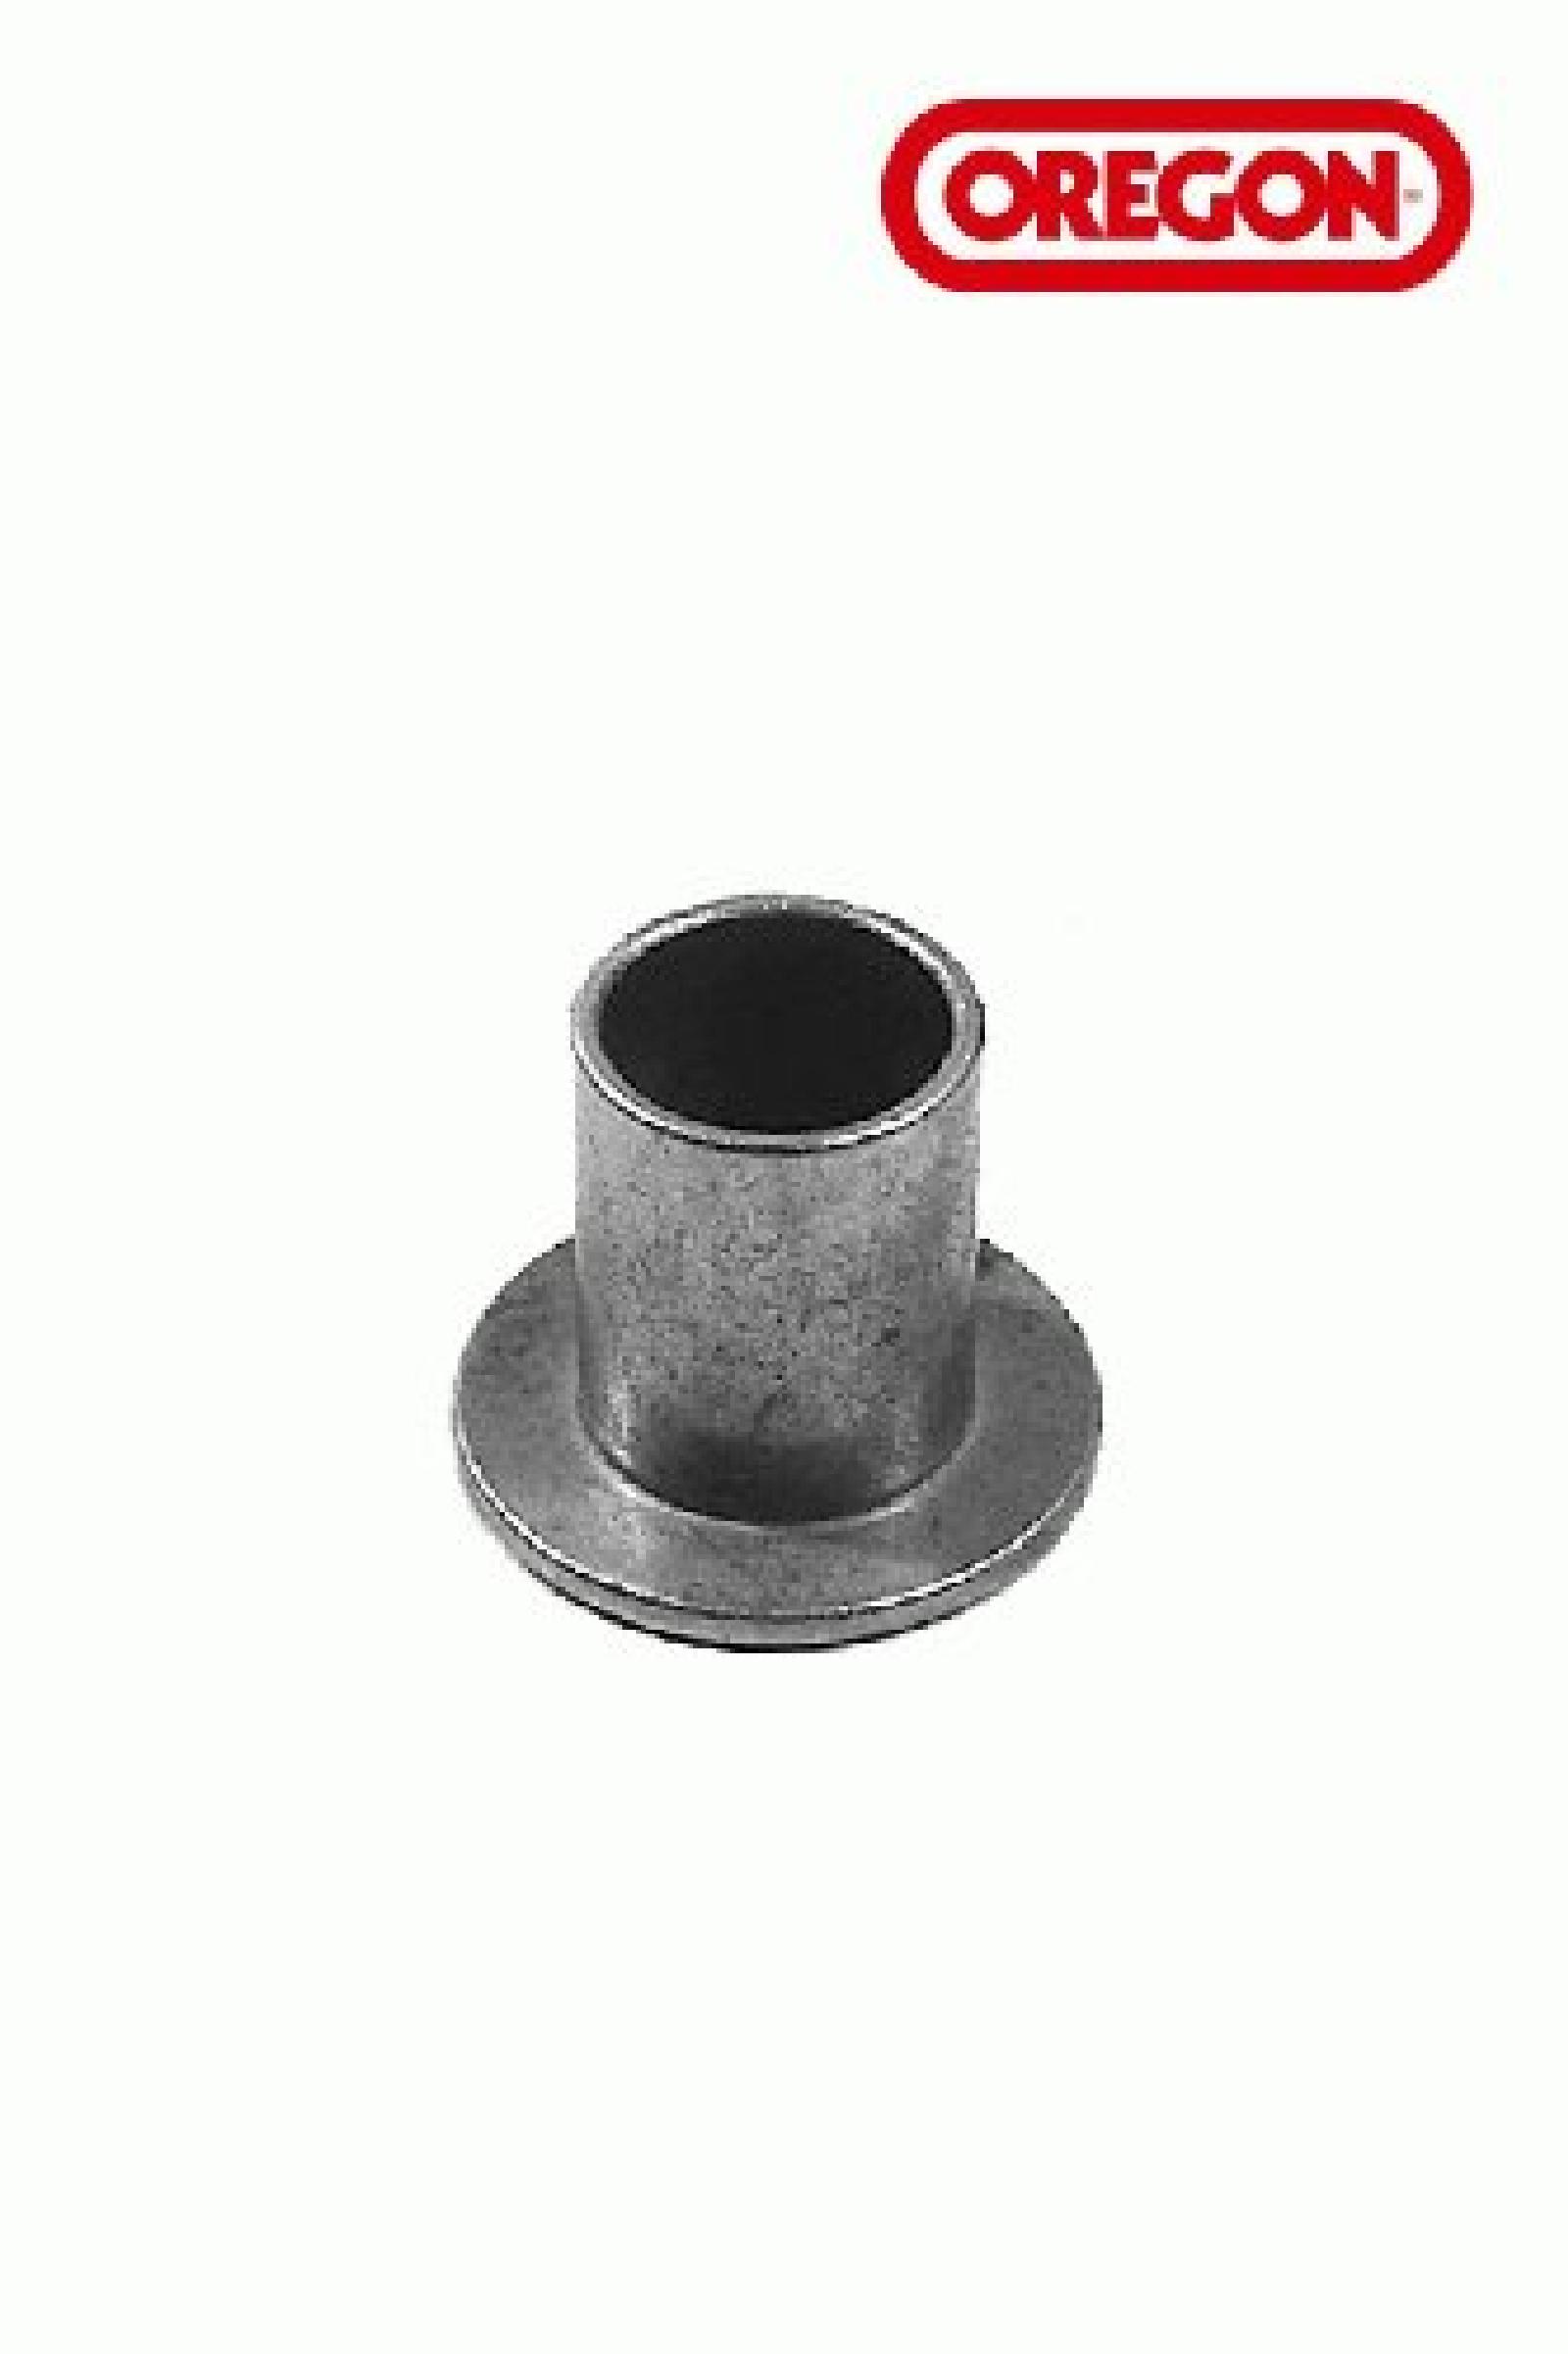 BUSHING BRONZE 5/8 X 3/4 part# 45-091 by Oregon - Click Image to Close